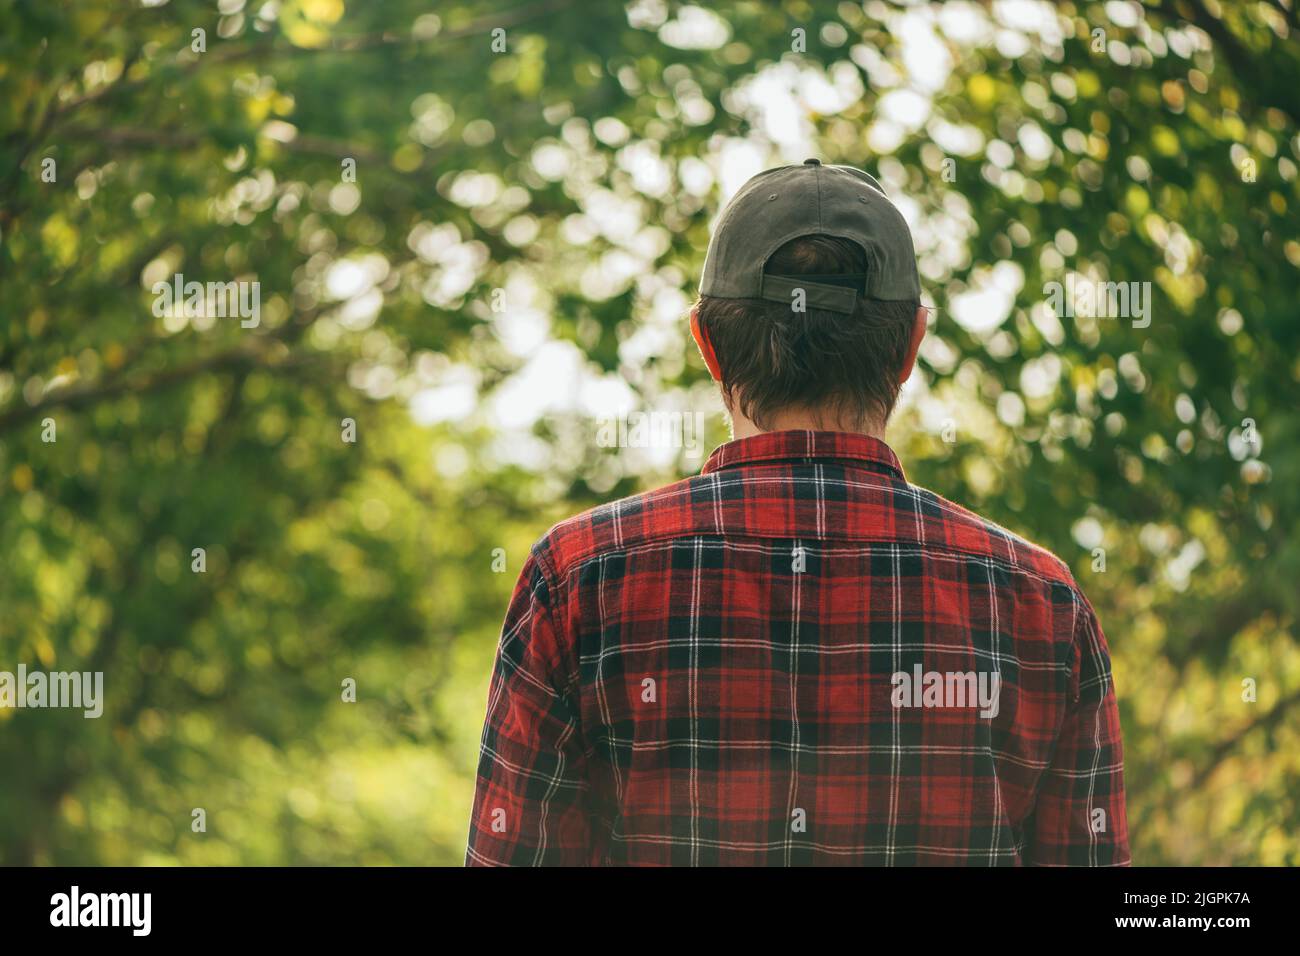 Rear view of male farmer wearing plaid shirt and trucker's hat standing in walnut orchard and looking at trees, selective focus Stock Photo